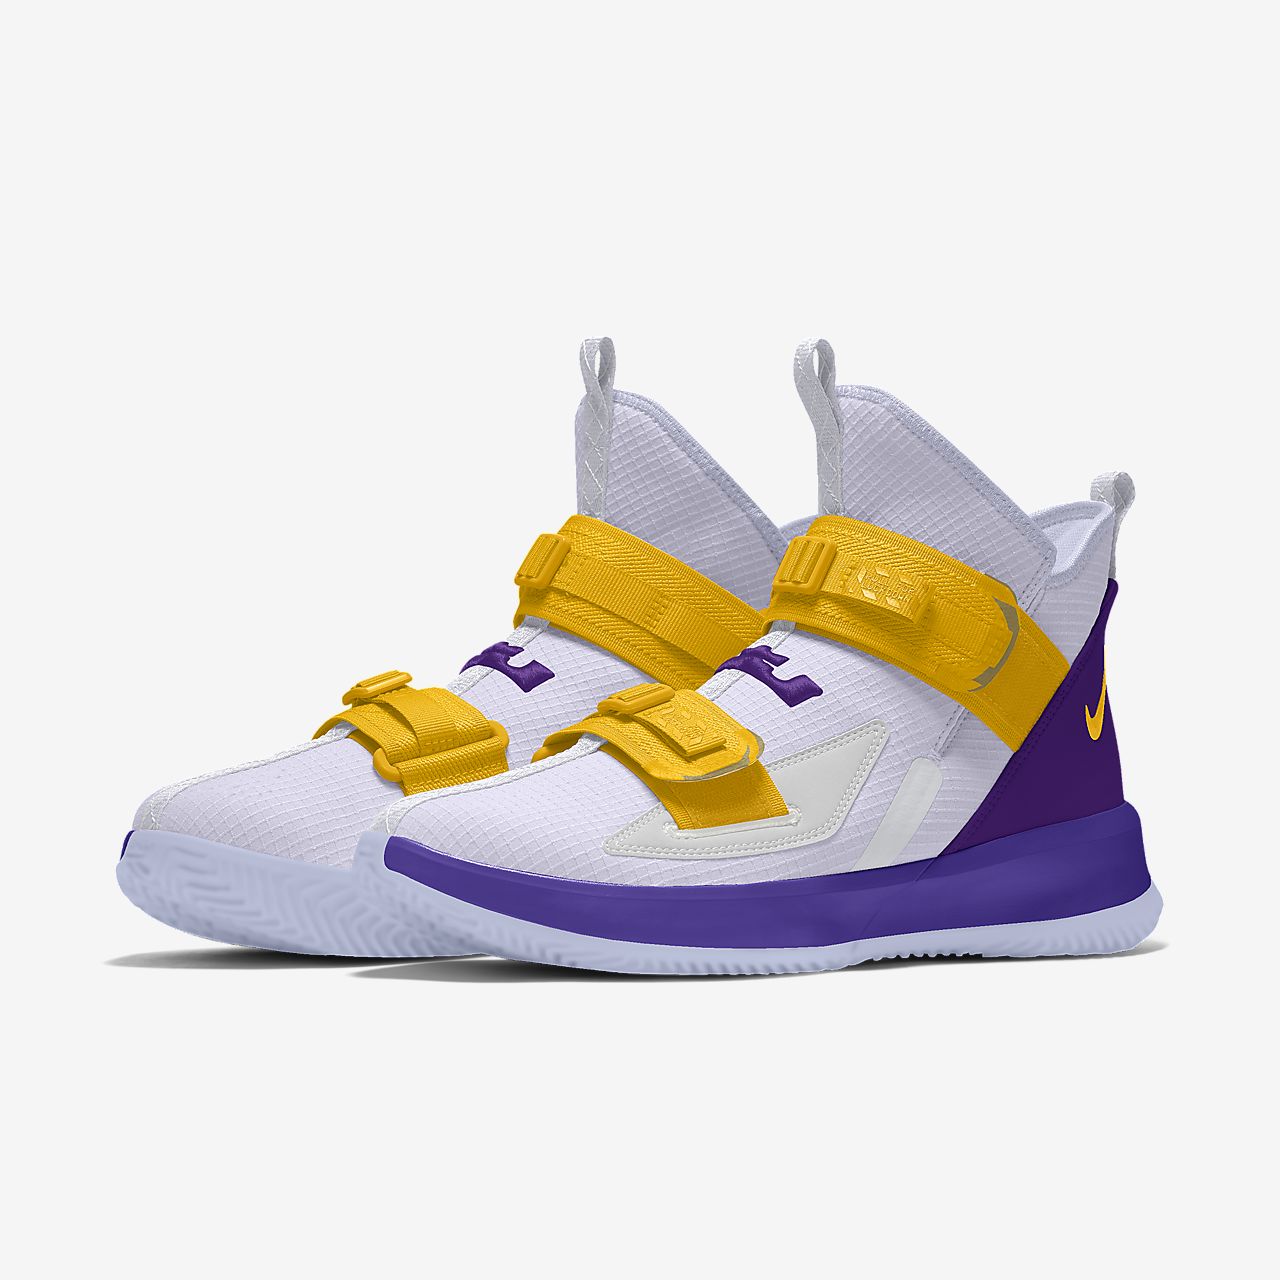 lebron soldier 13 by you